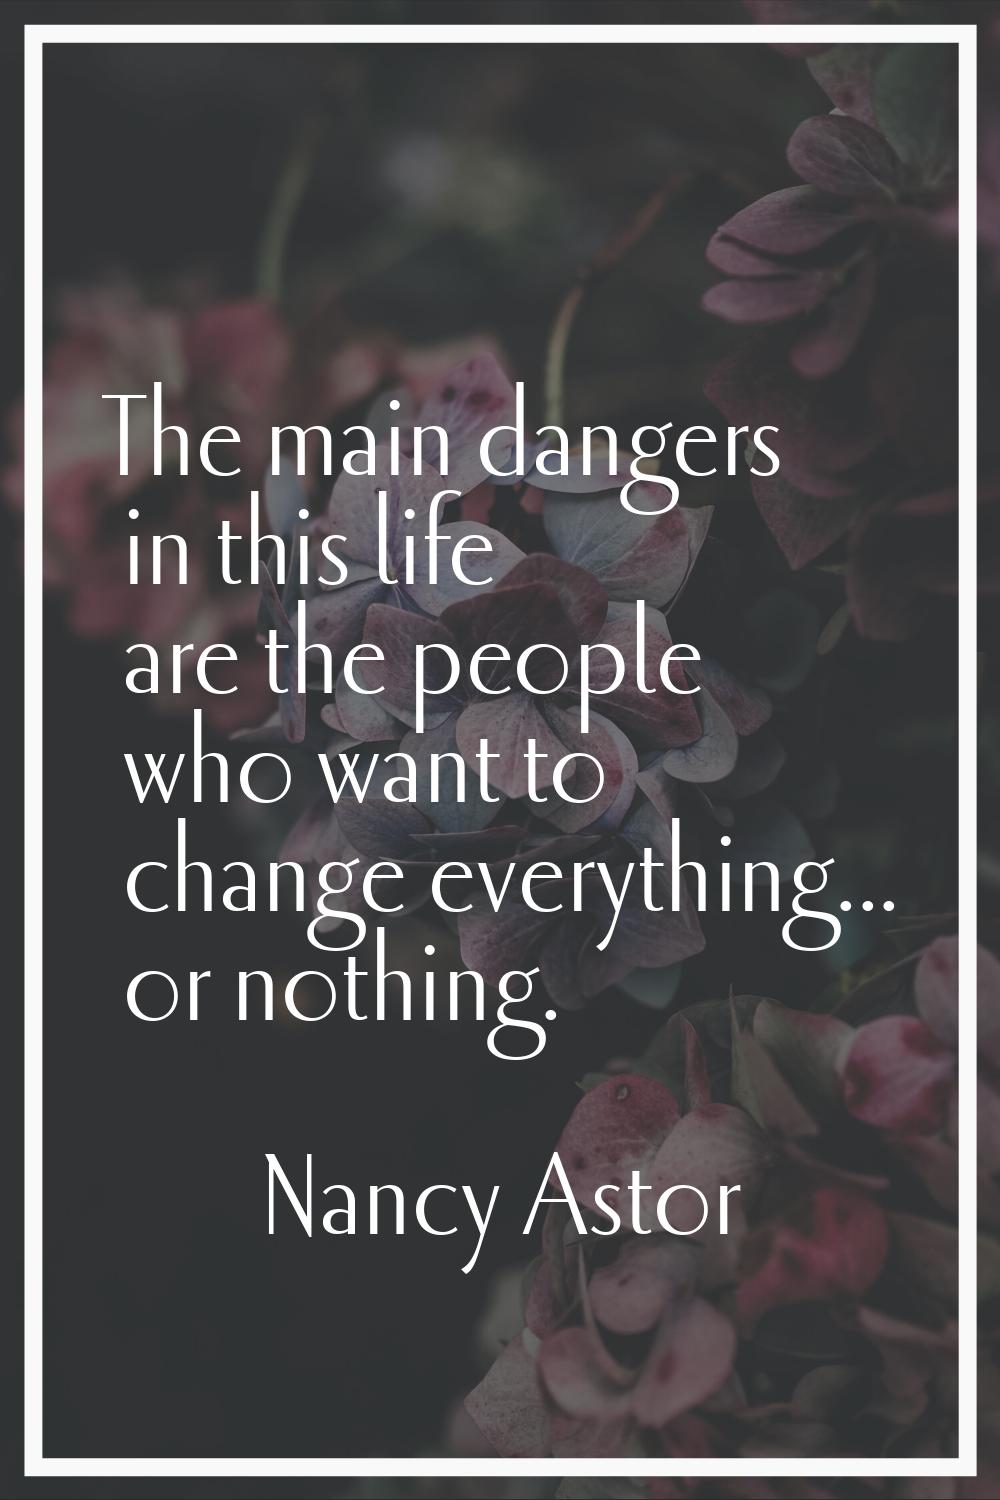 The main dangers in this life are the people who want to change everything... or nothing.